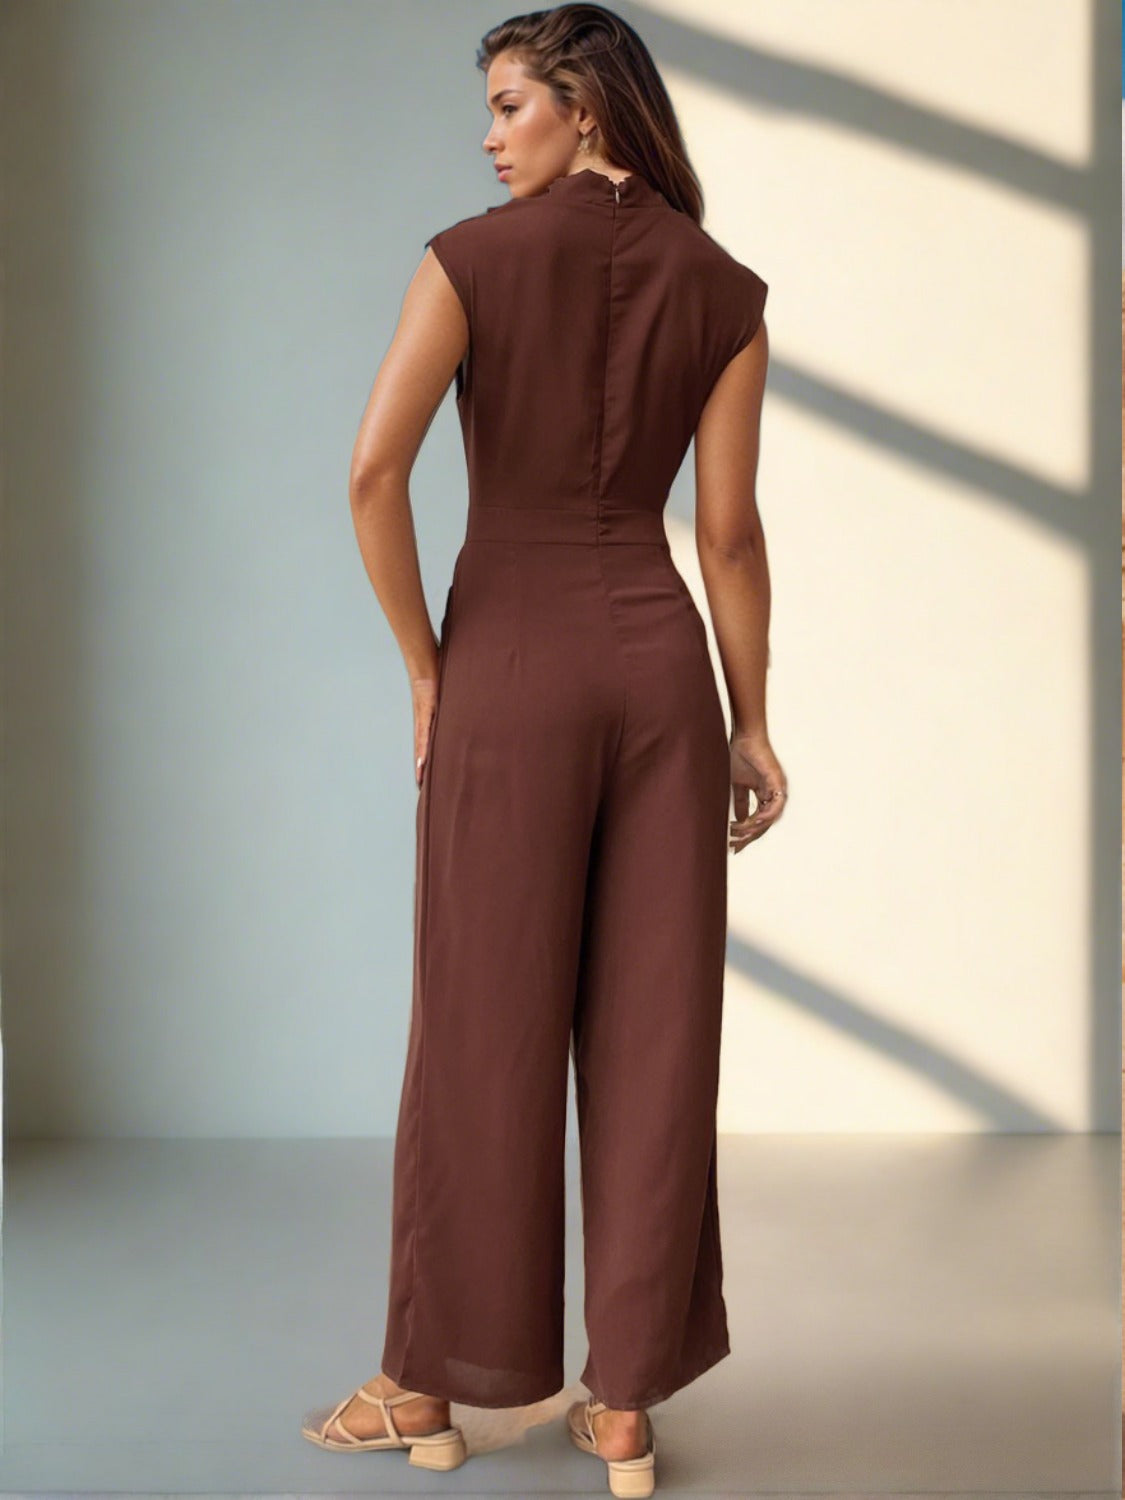 Ruched Mock Neck Sleeveless Jumpsuit - Four Color Choices